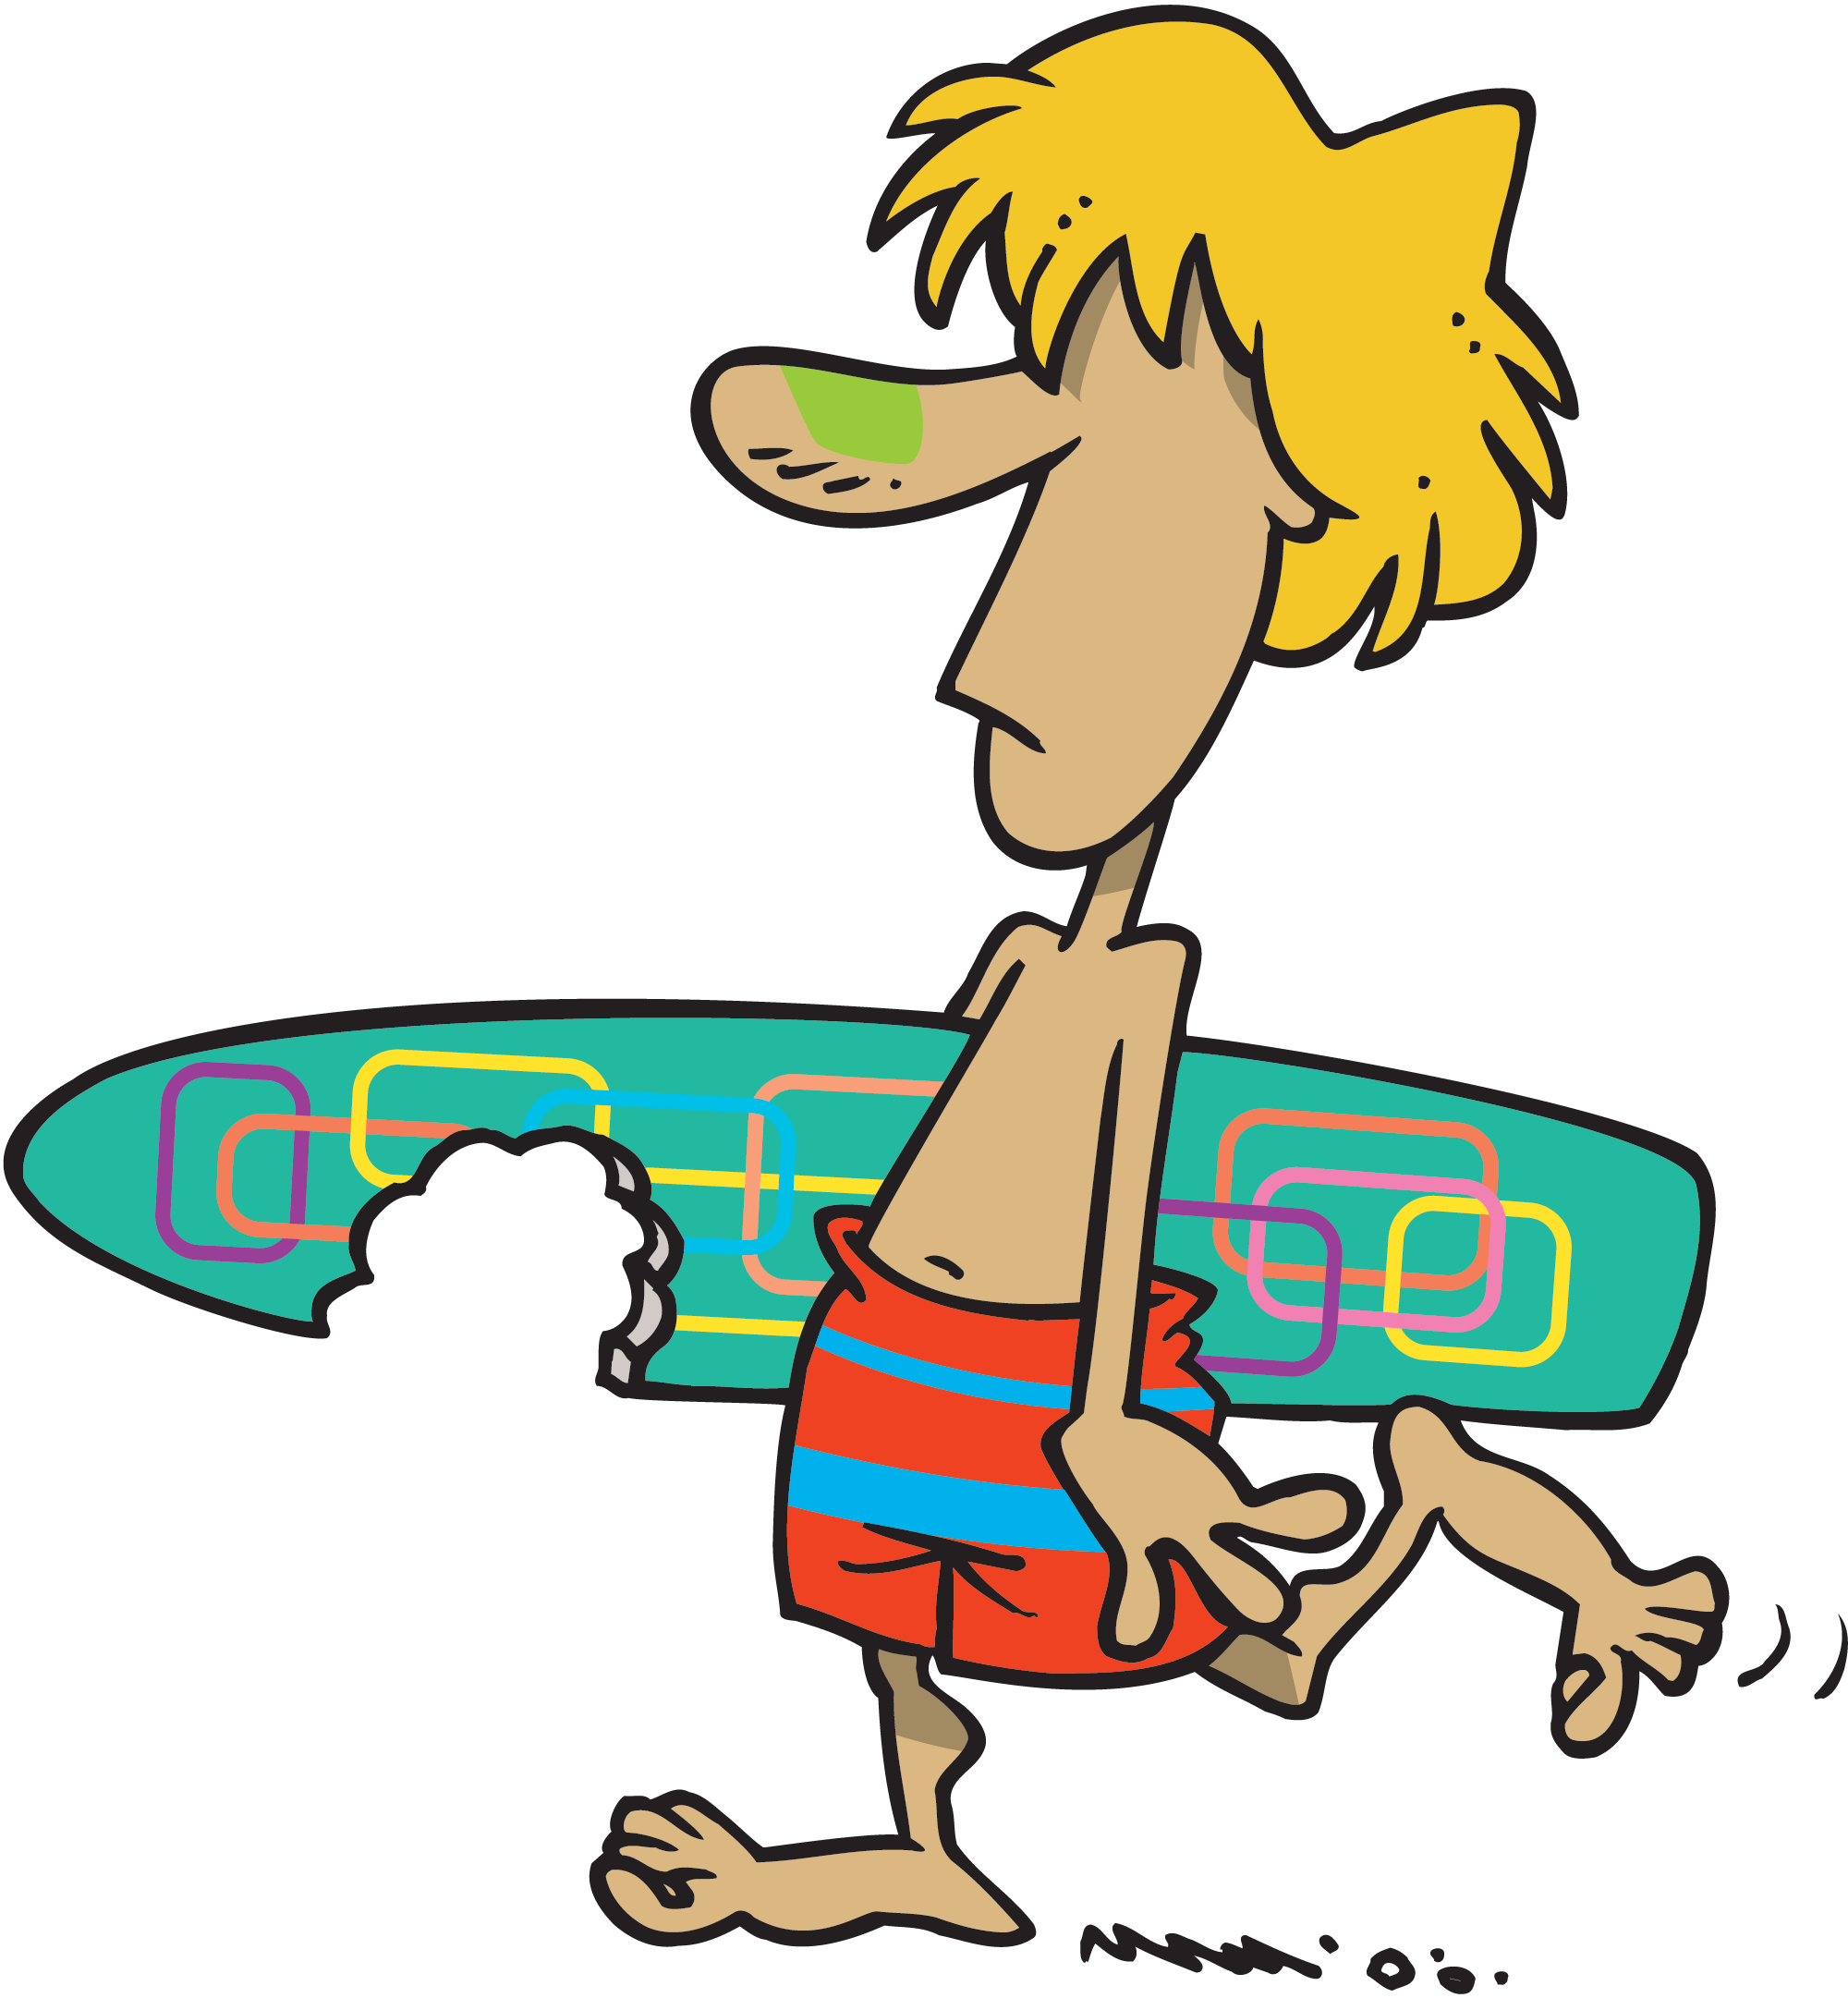 Surf dude png trans. Waves clipart surfing